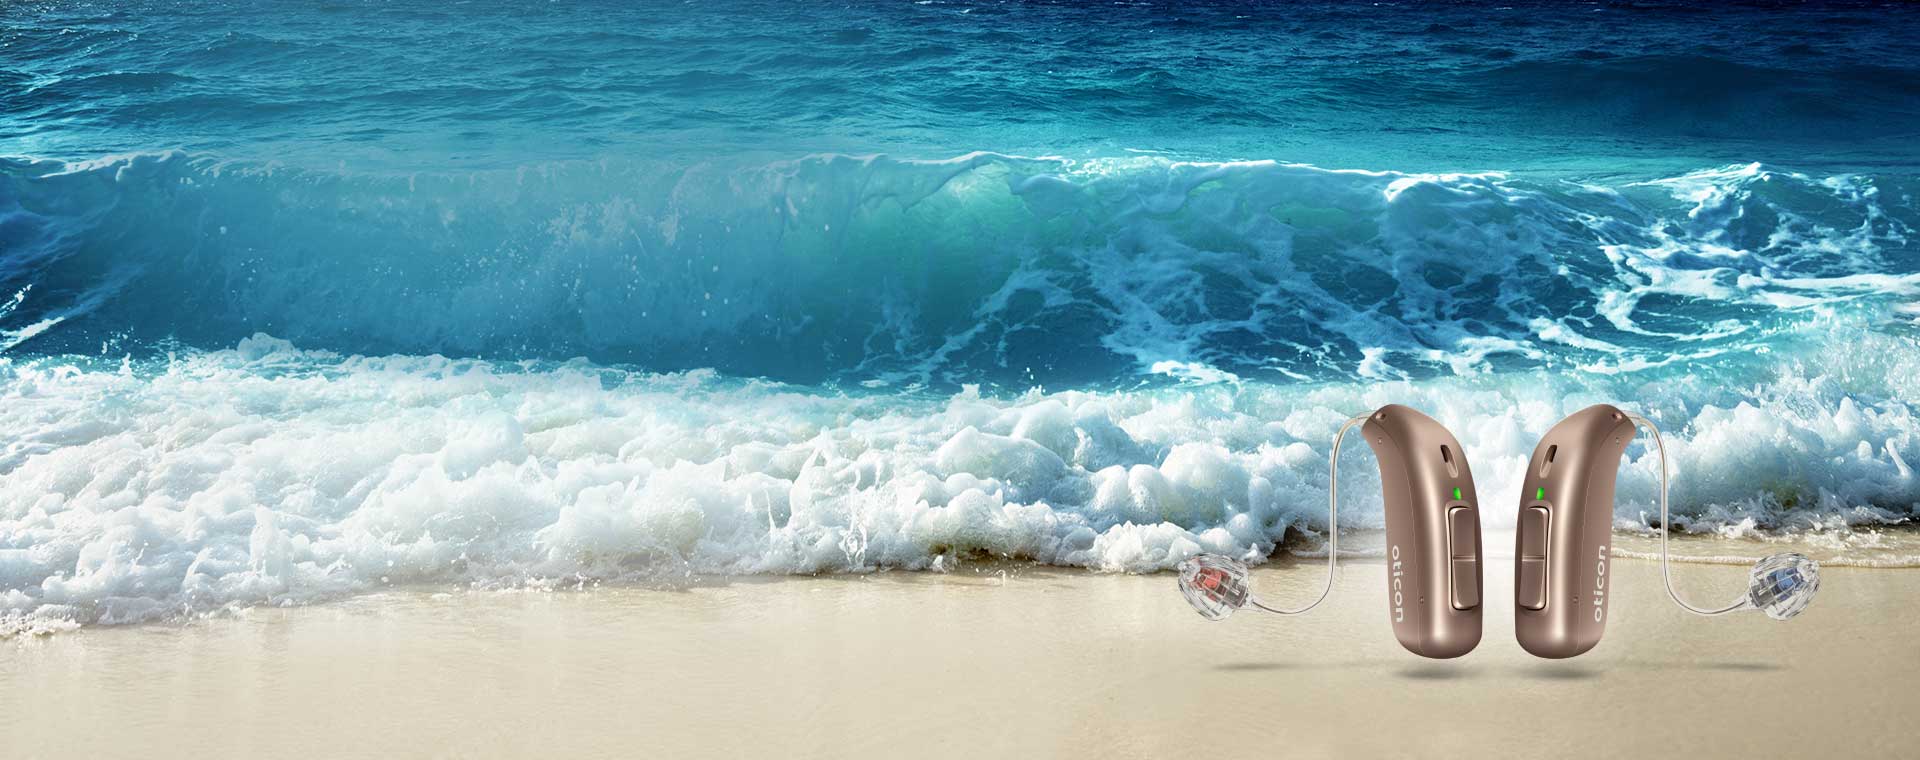 Image shows two hearing aids next to the sea